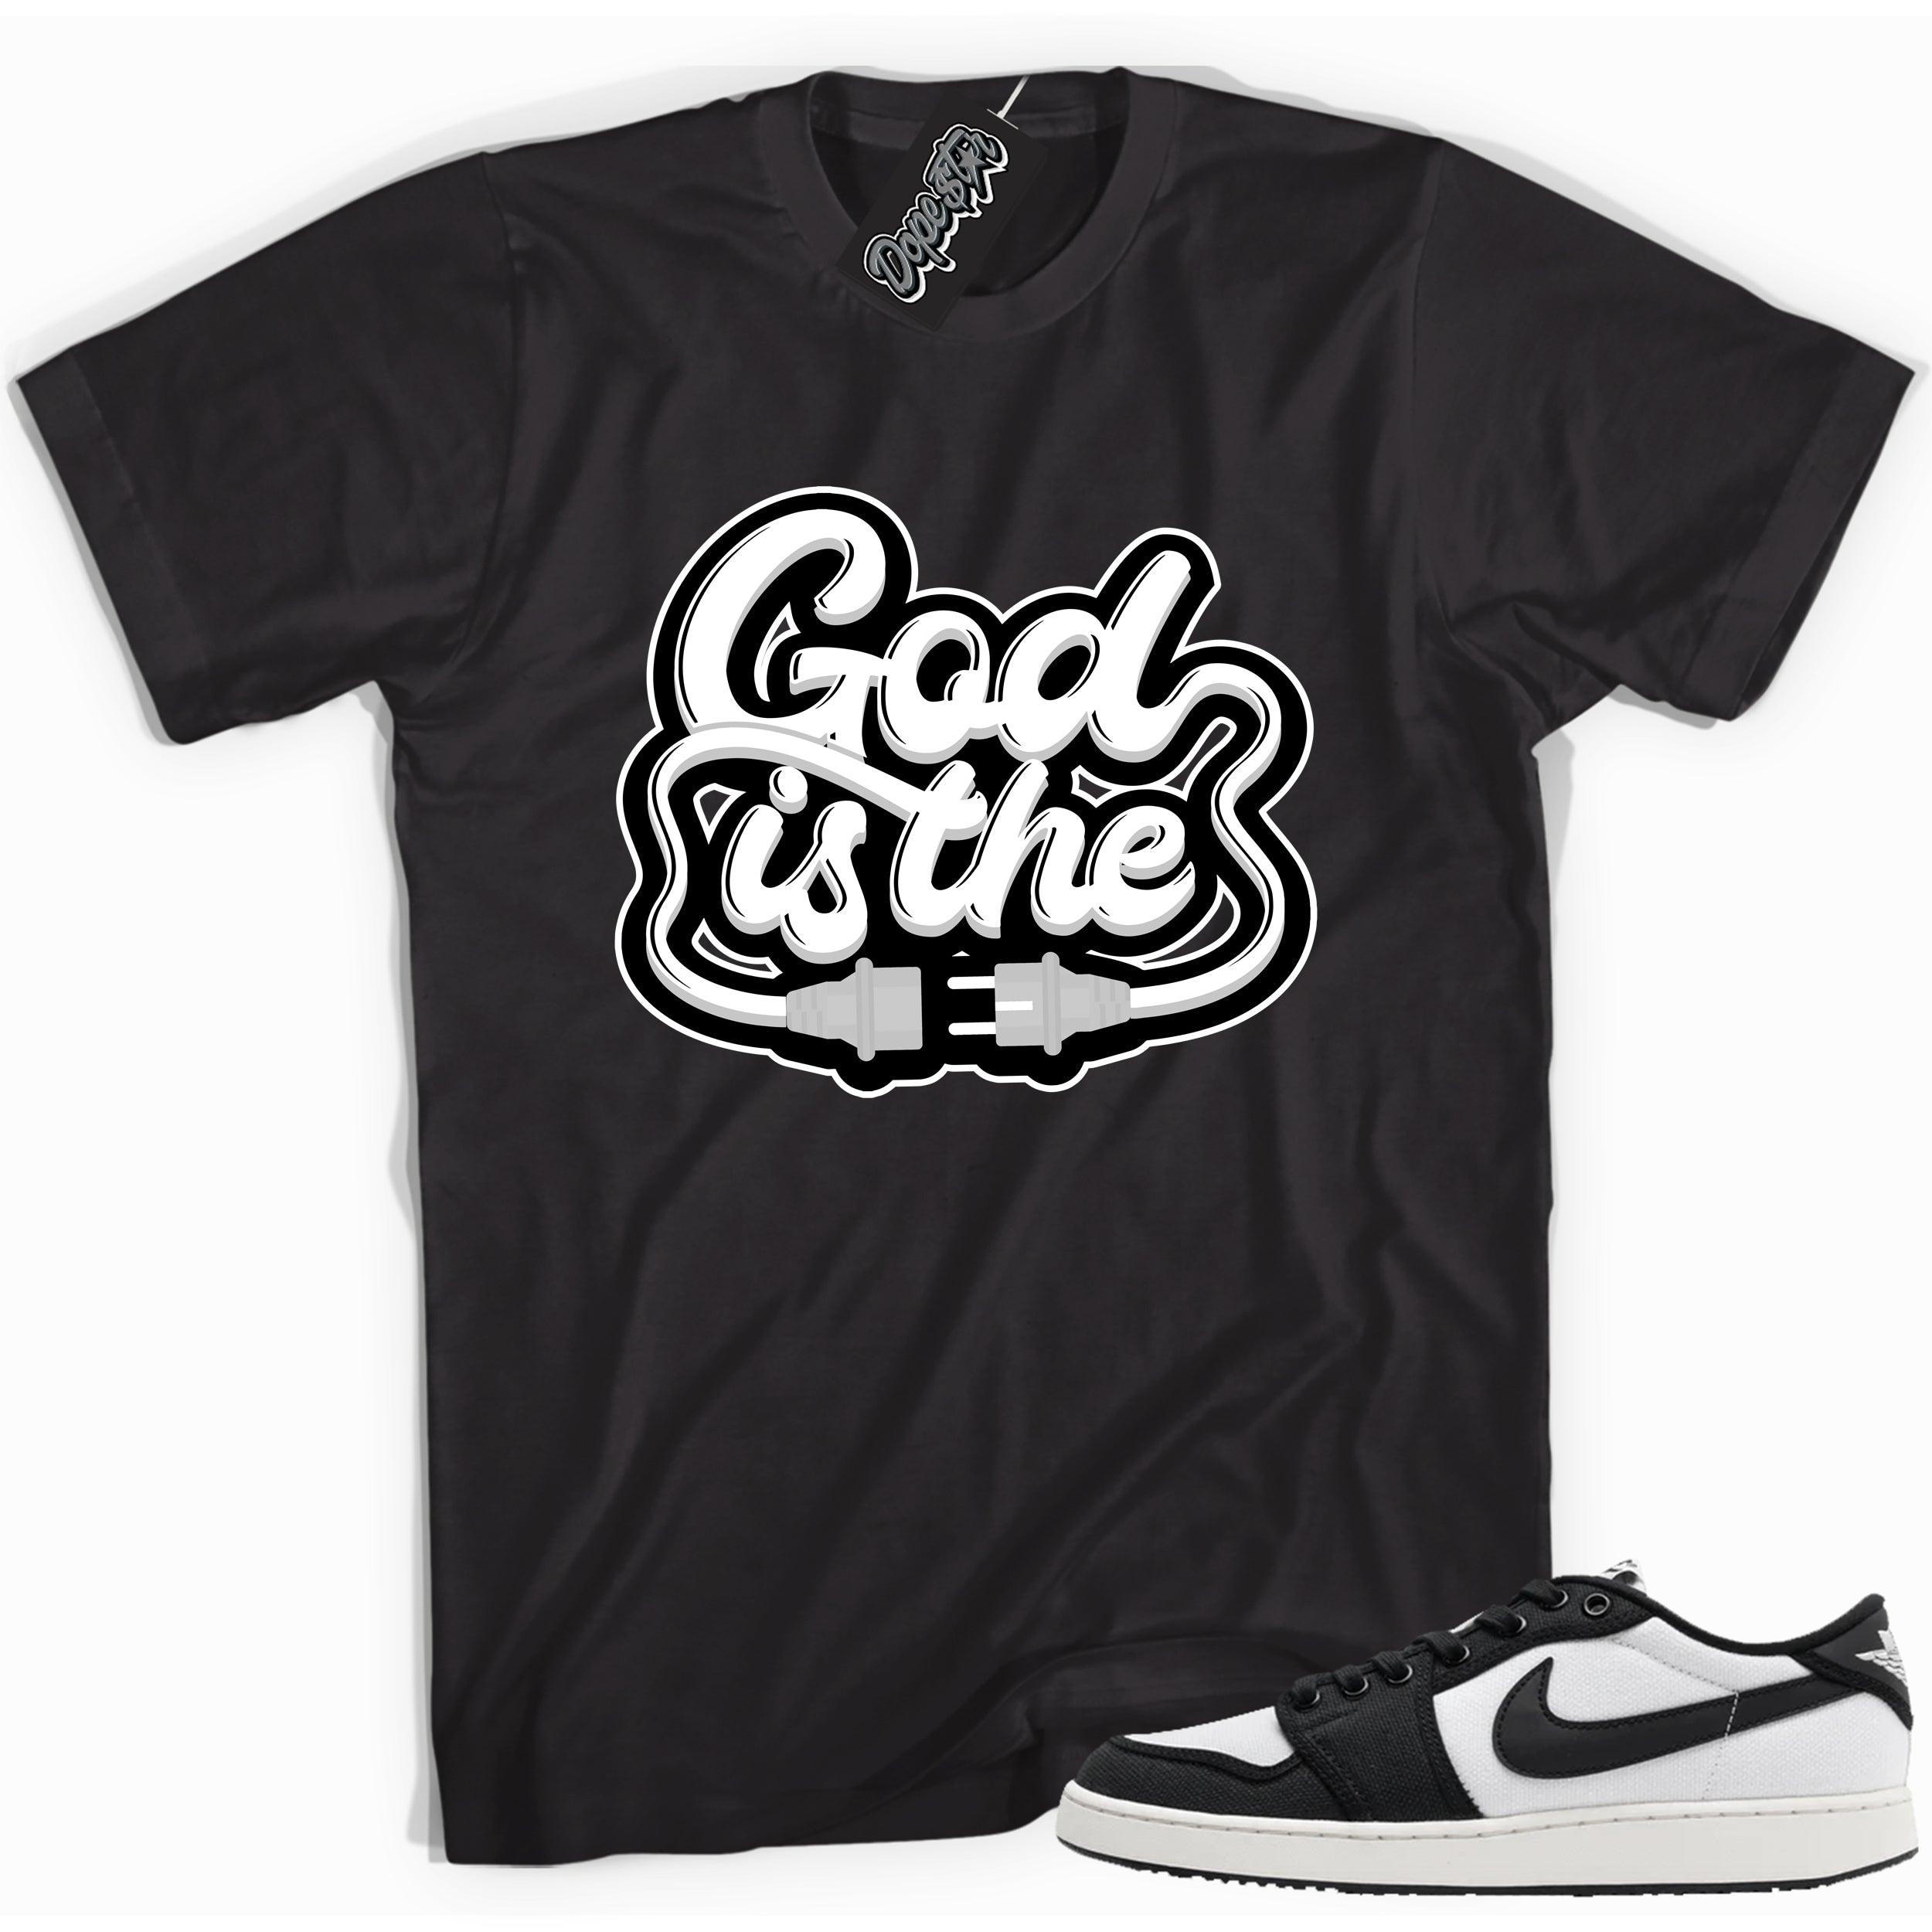 Cool black graphic tee with 'god is the plug' print, that perfectly matches Air Jordan 1 Retro Ajko Low Black & White sneakers.